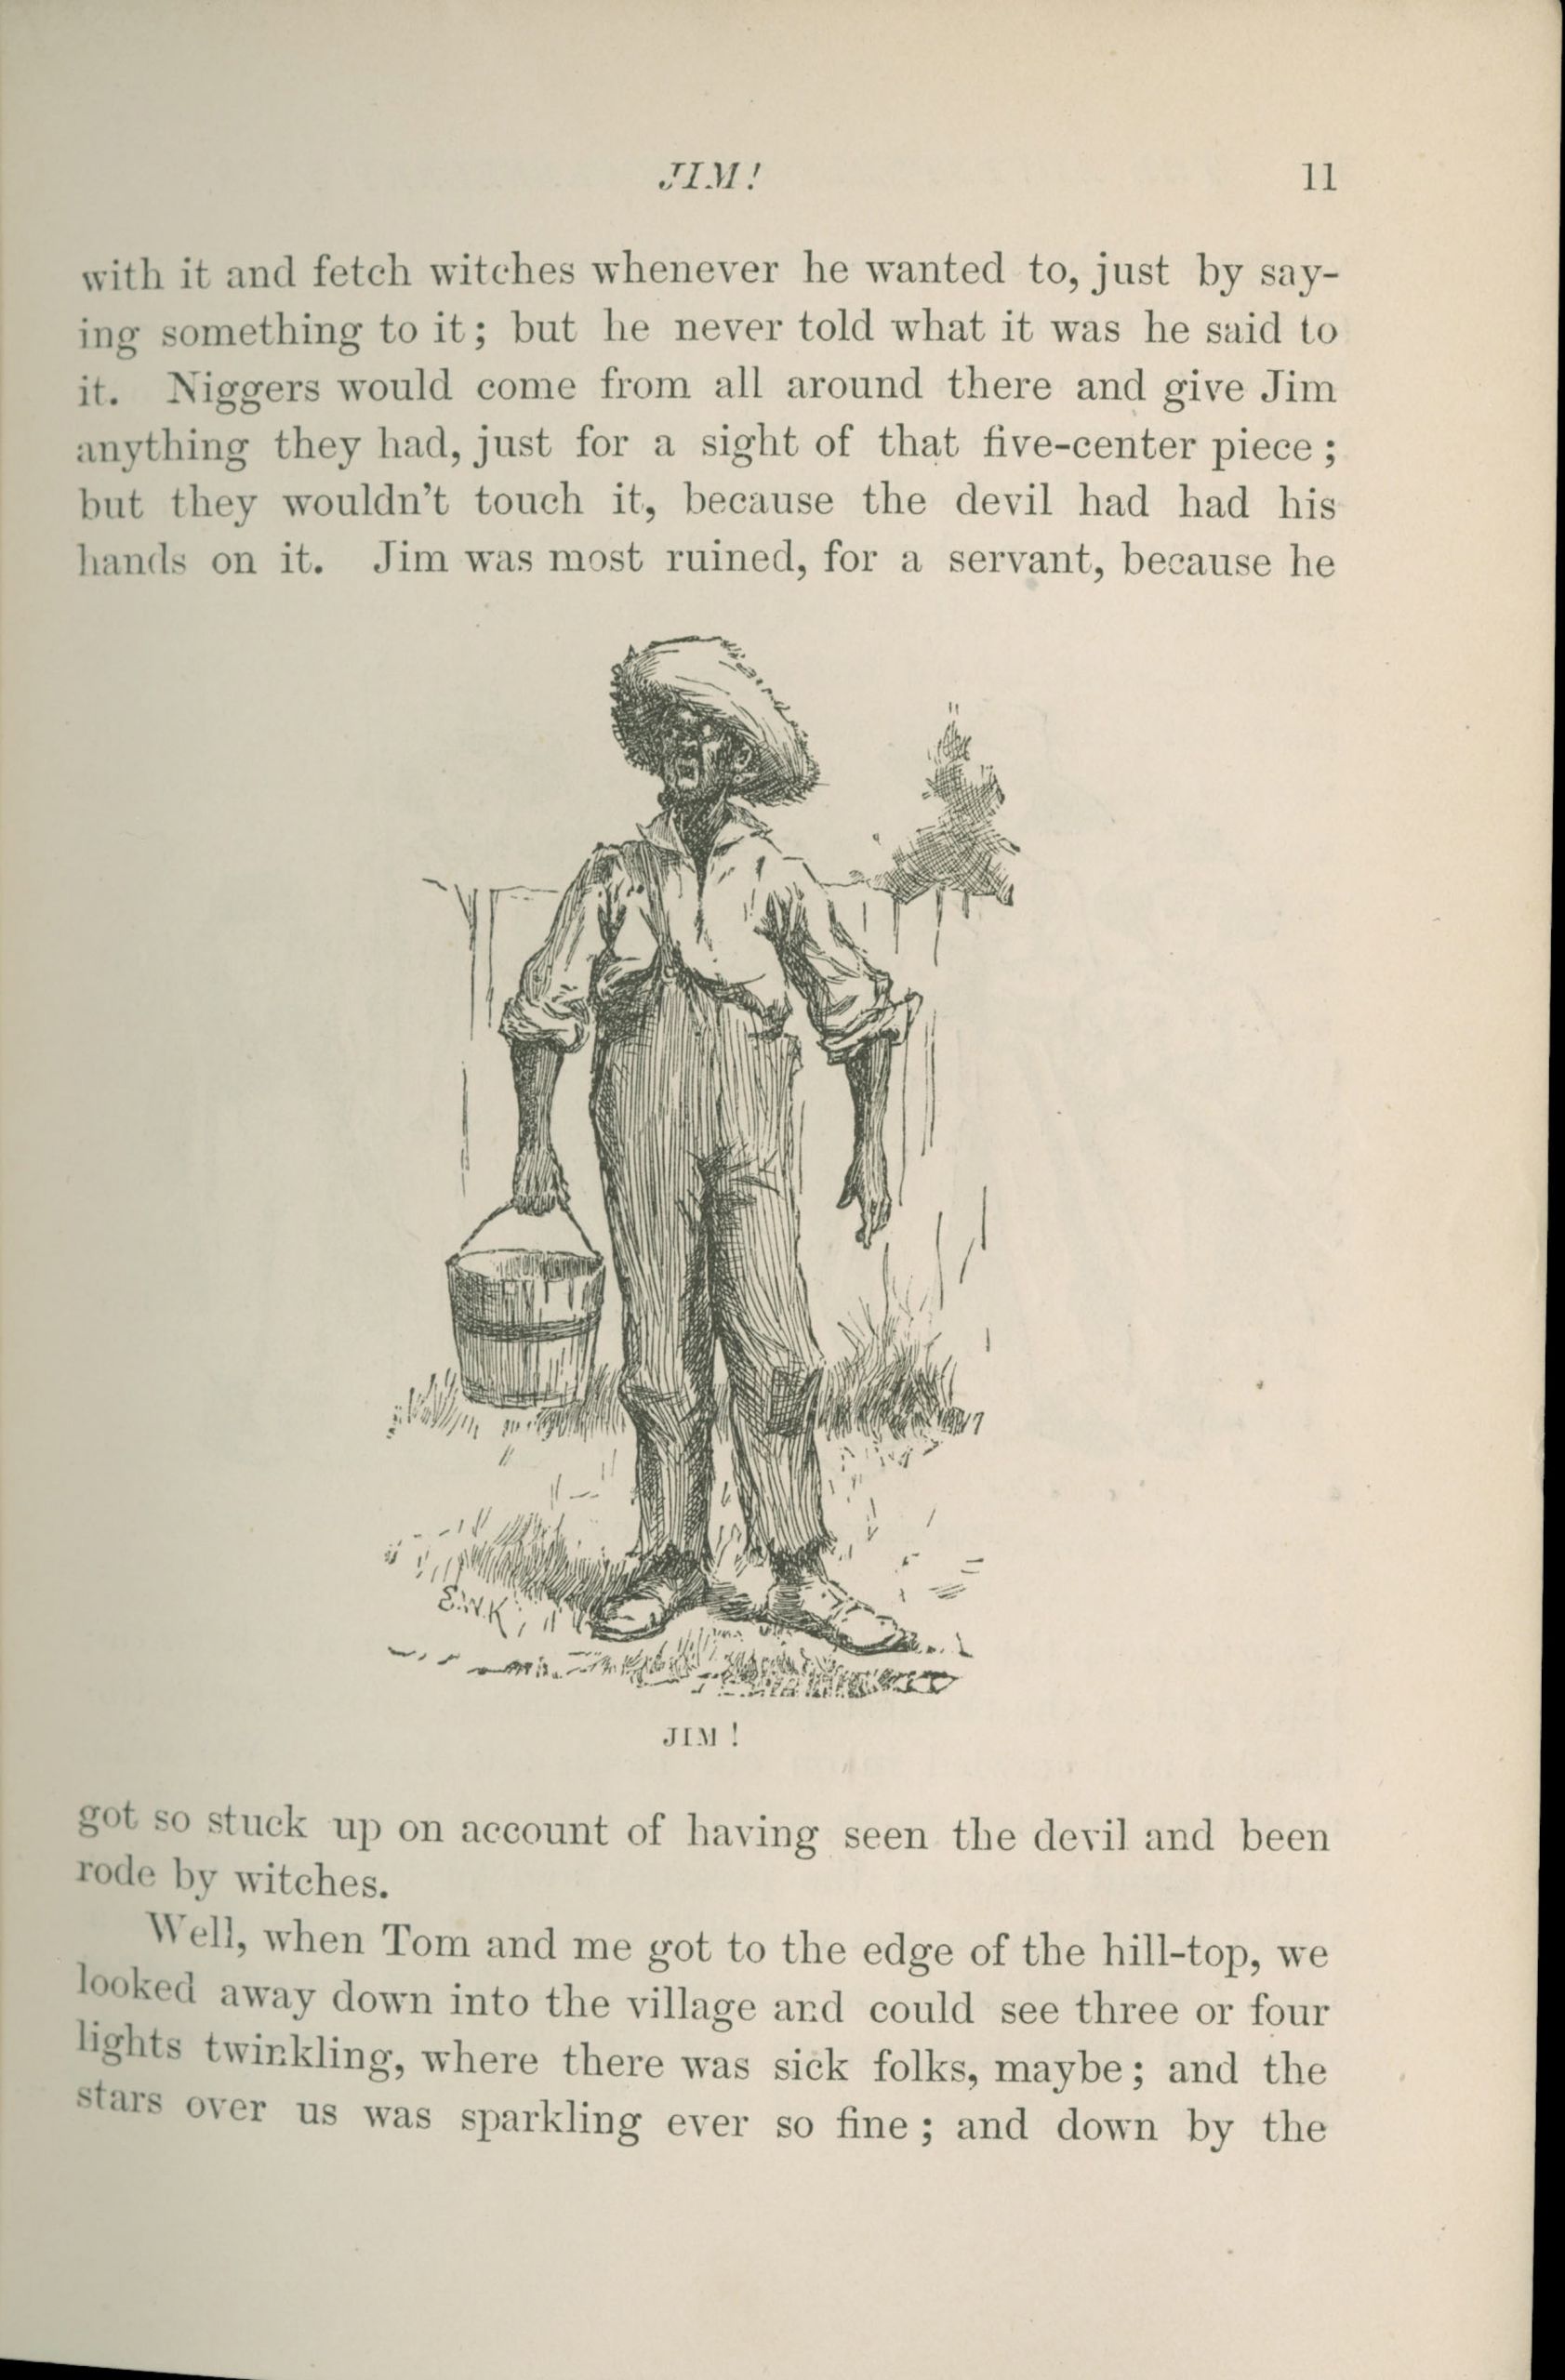 Huck Finn Education Quotes
 Huckleberry Finn Pages With Quotes QuotesGram